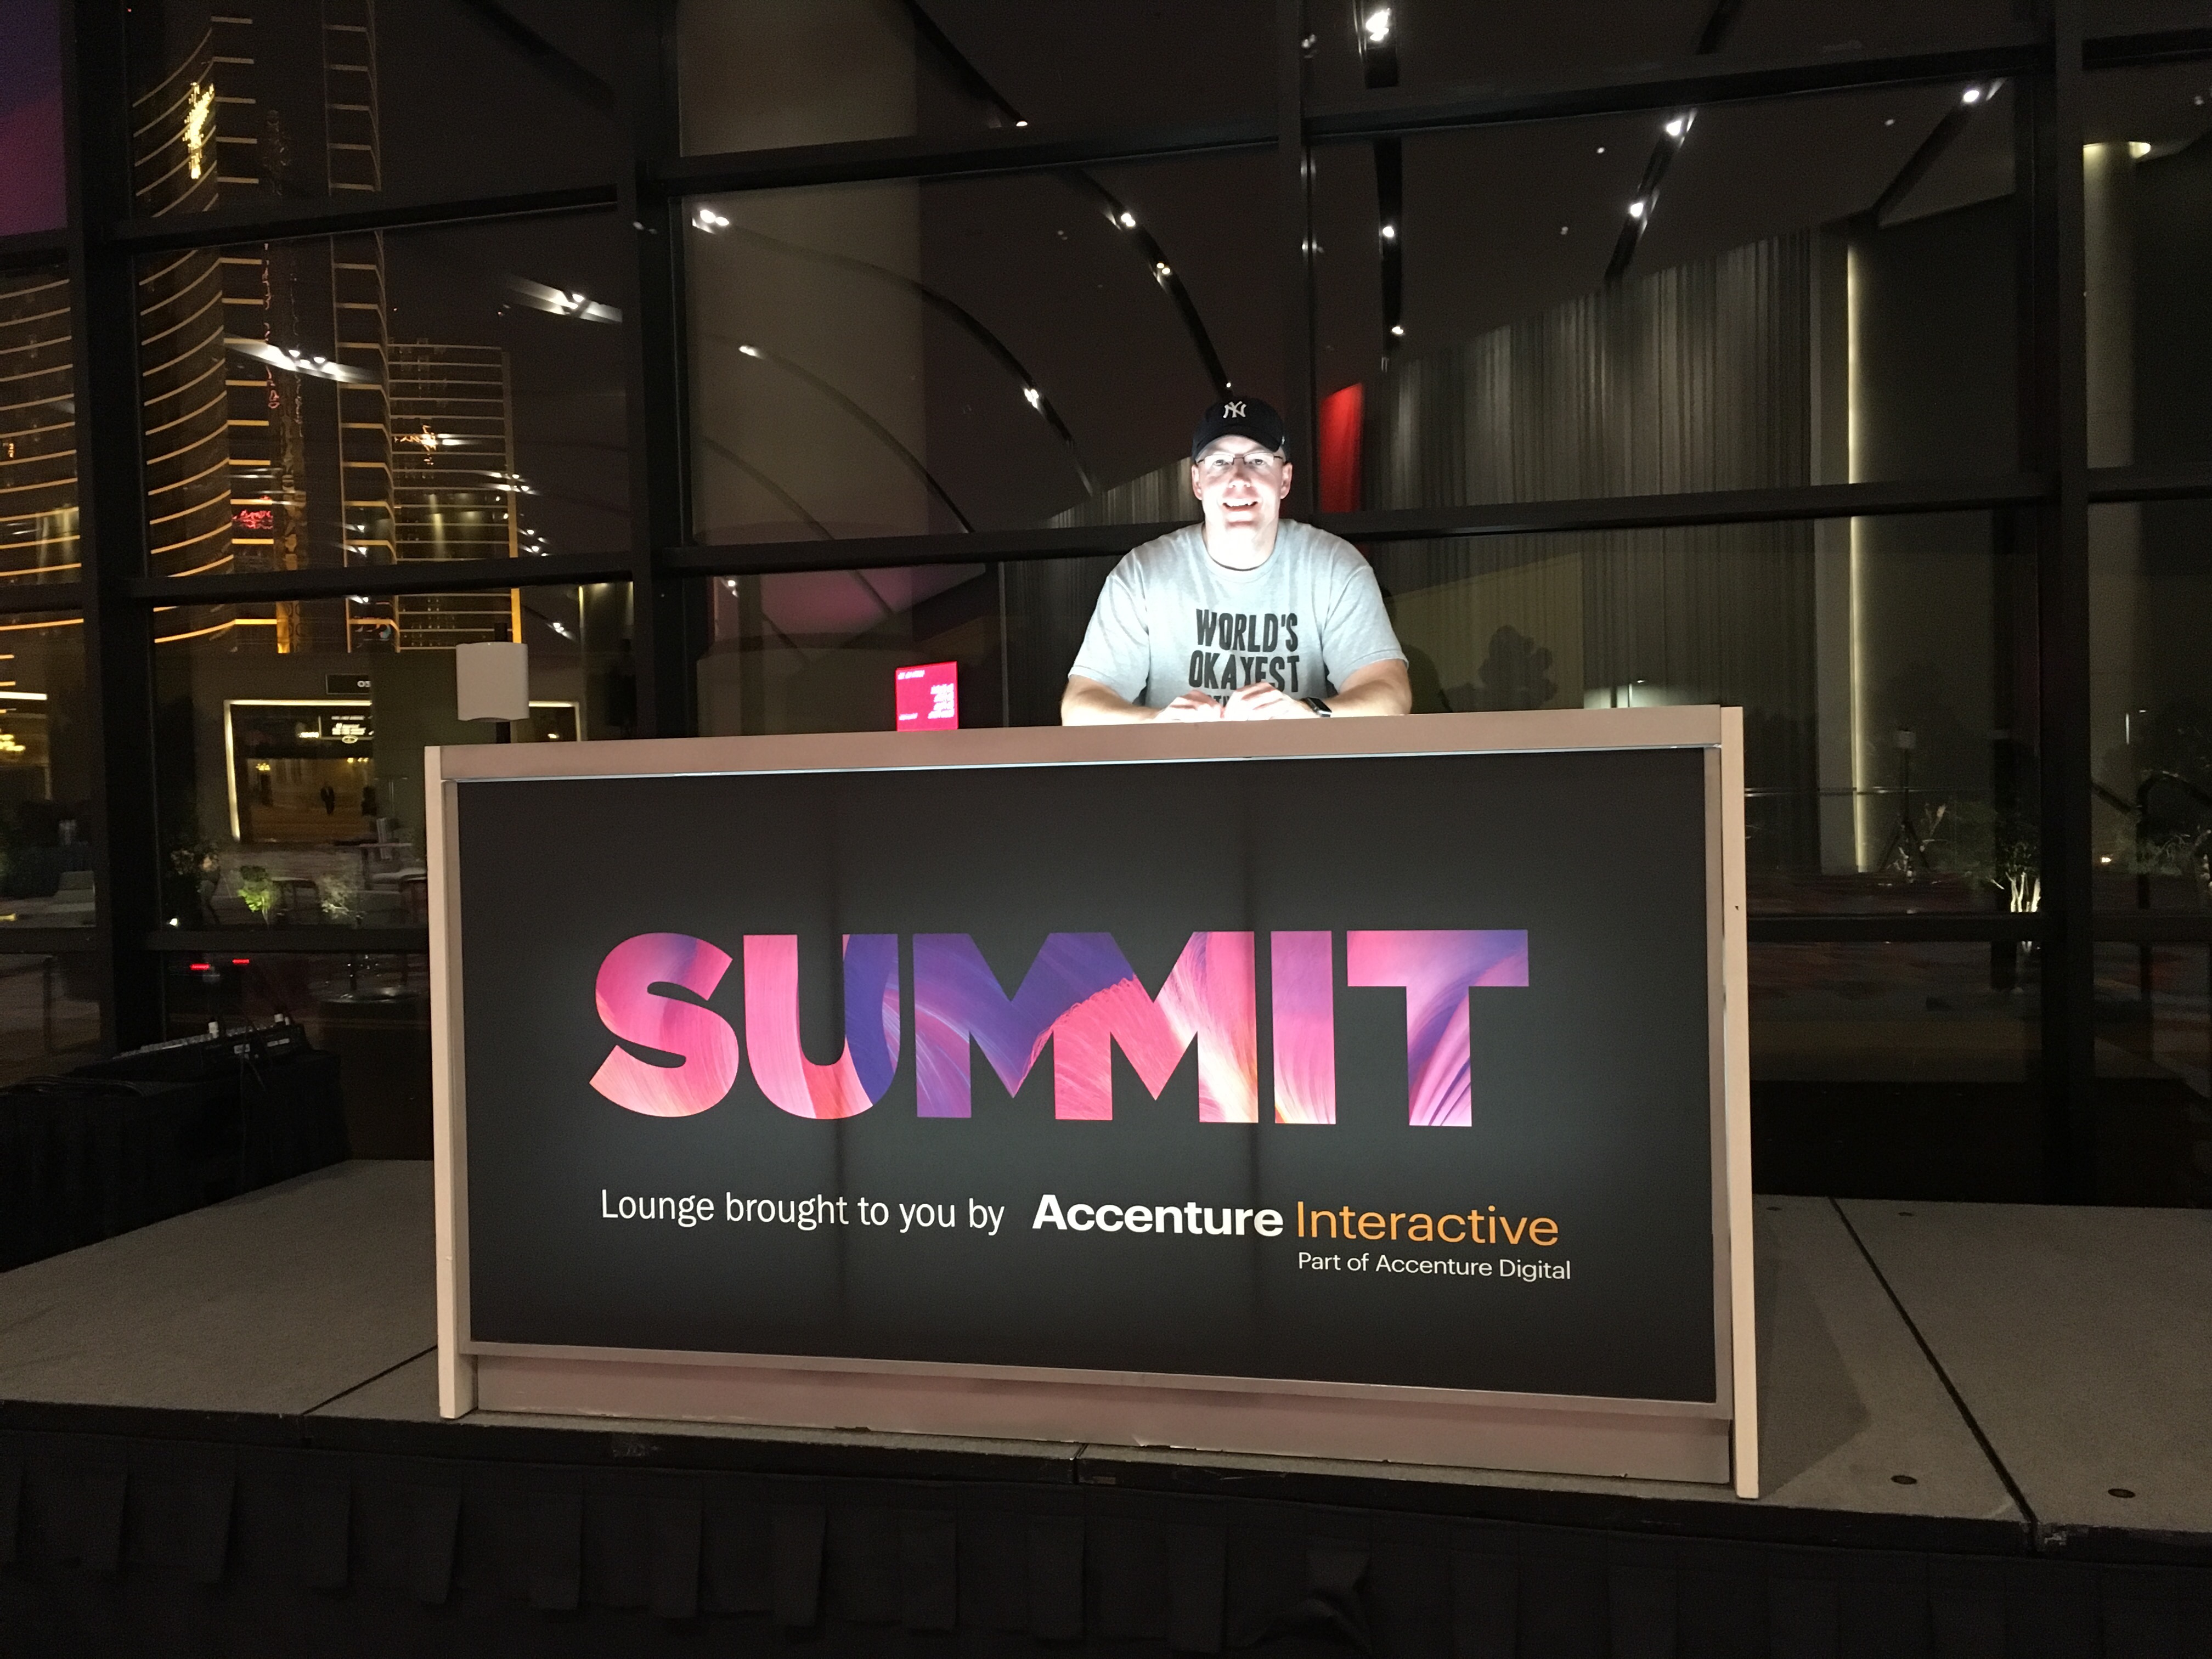 Christoph at the Adobe Summit as part of Adobe's influencer program